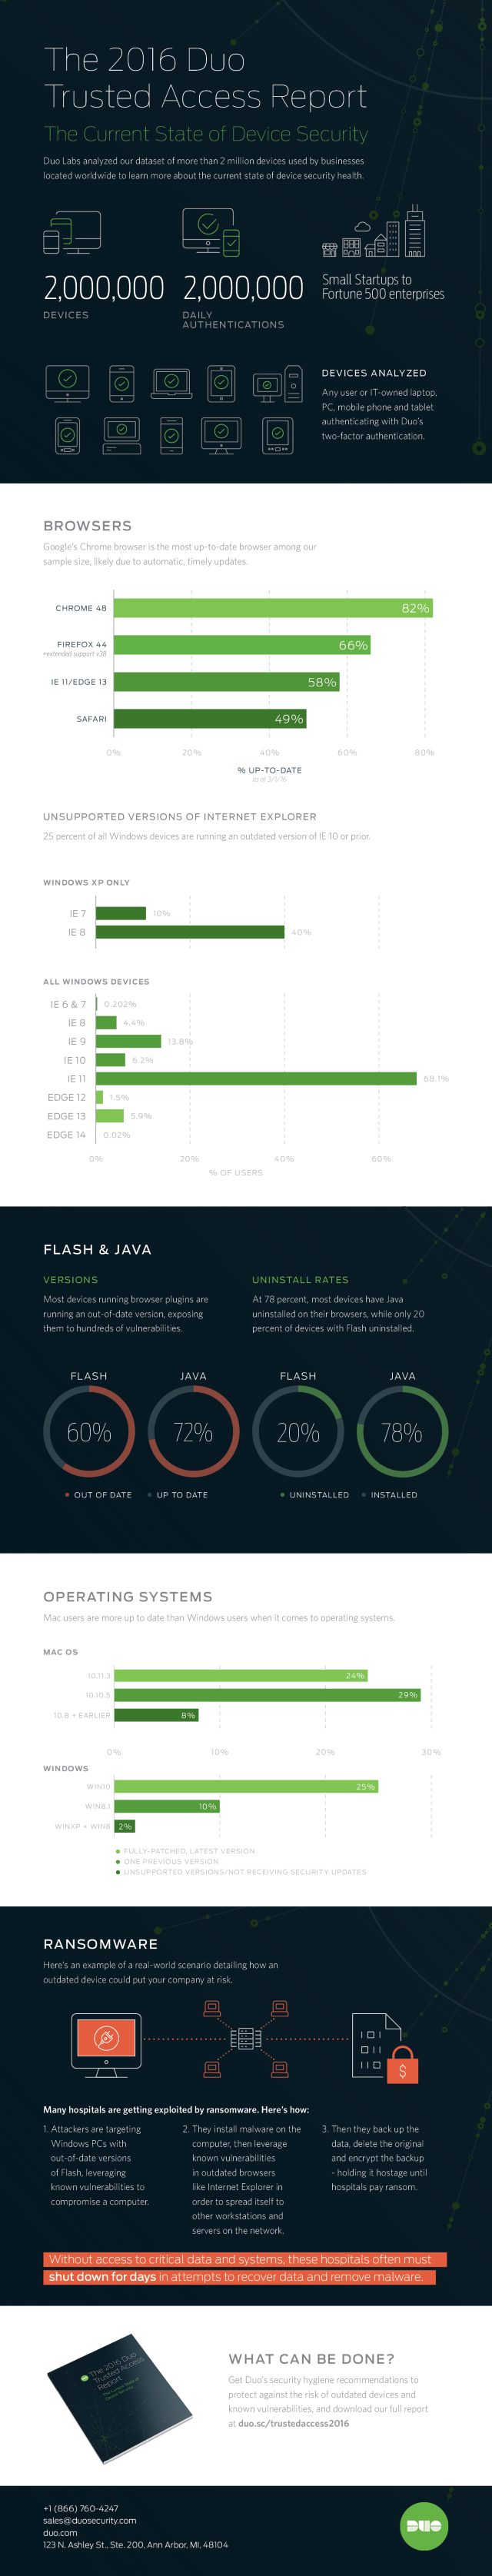 Duo Trusted Access Infographic